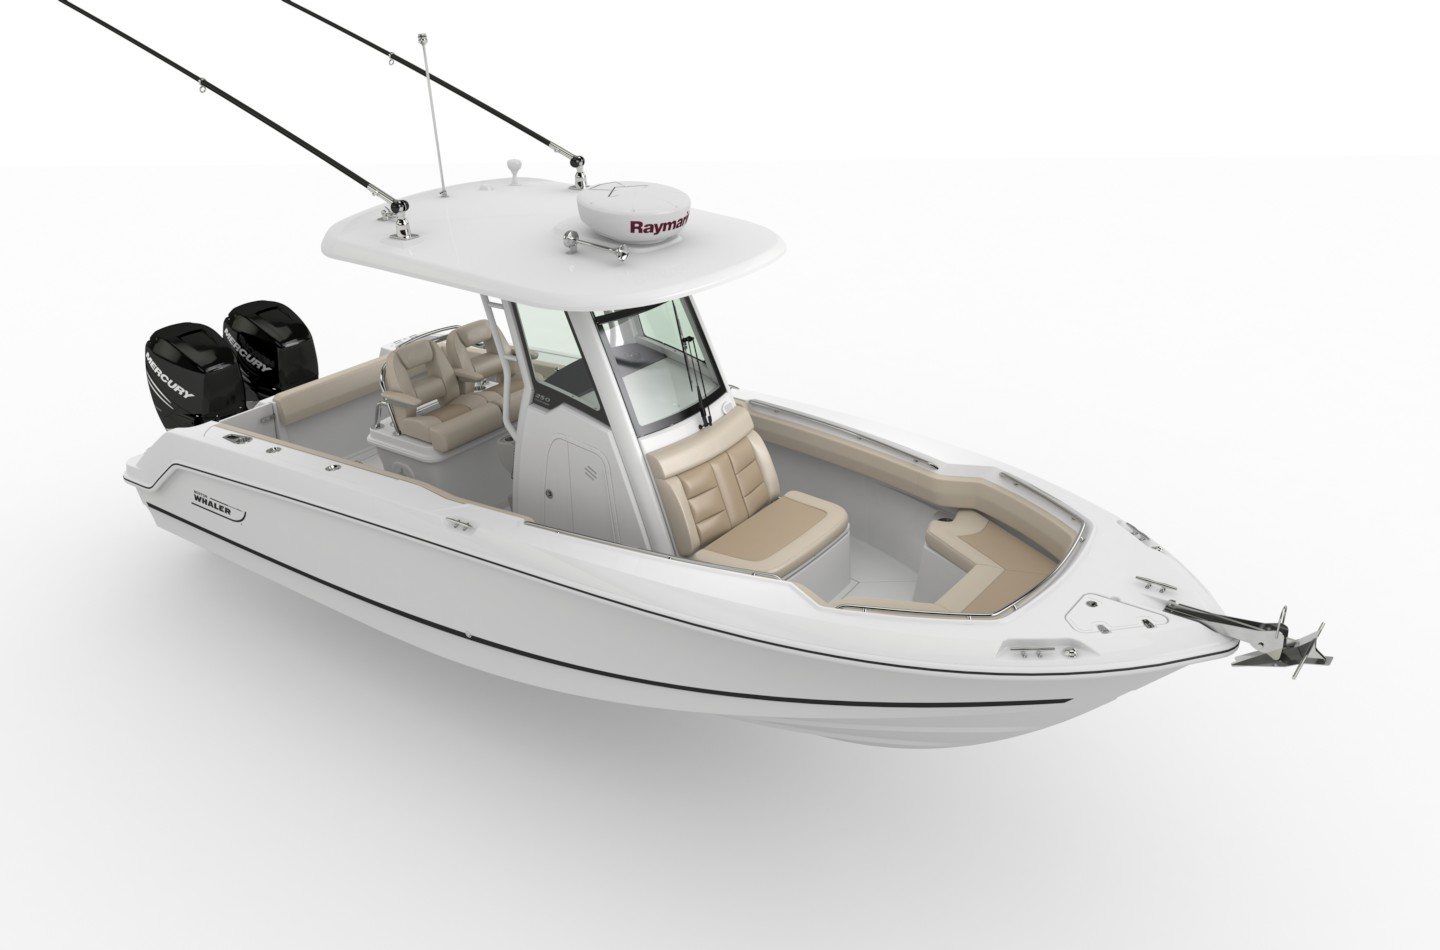 360 VR Virtual Tours of the Boston Whaler 250 Outrage